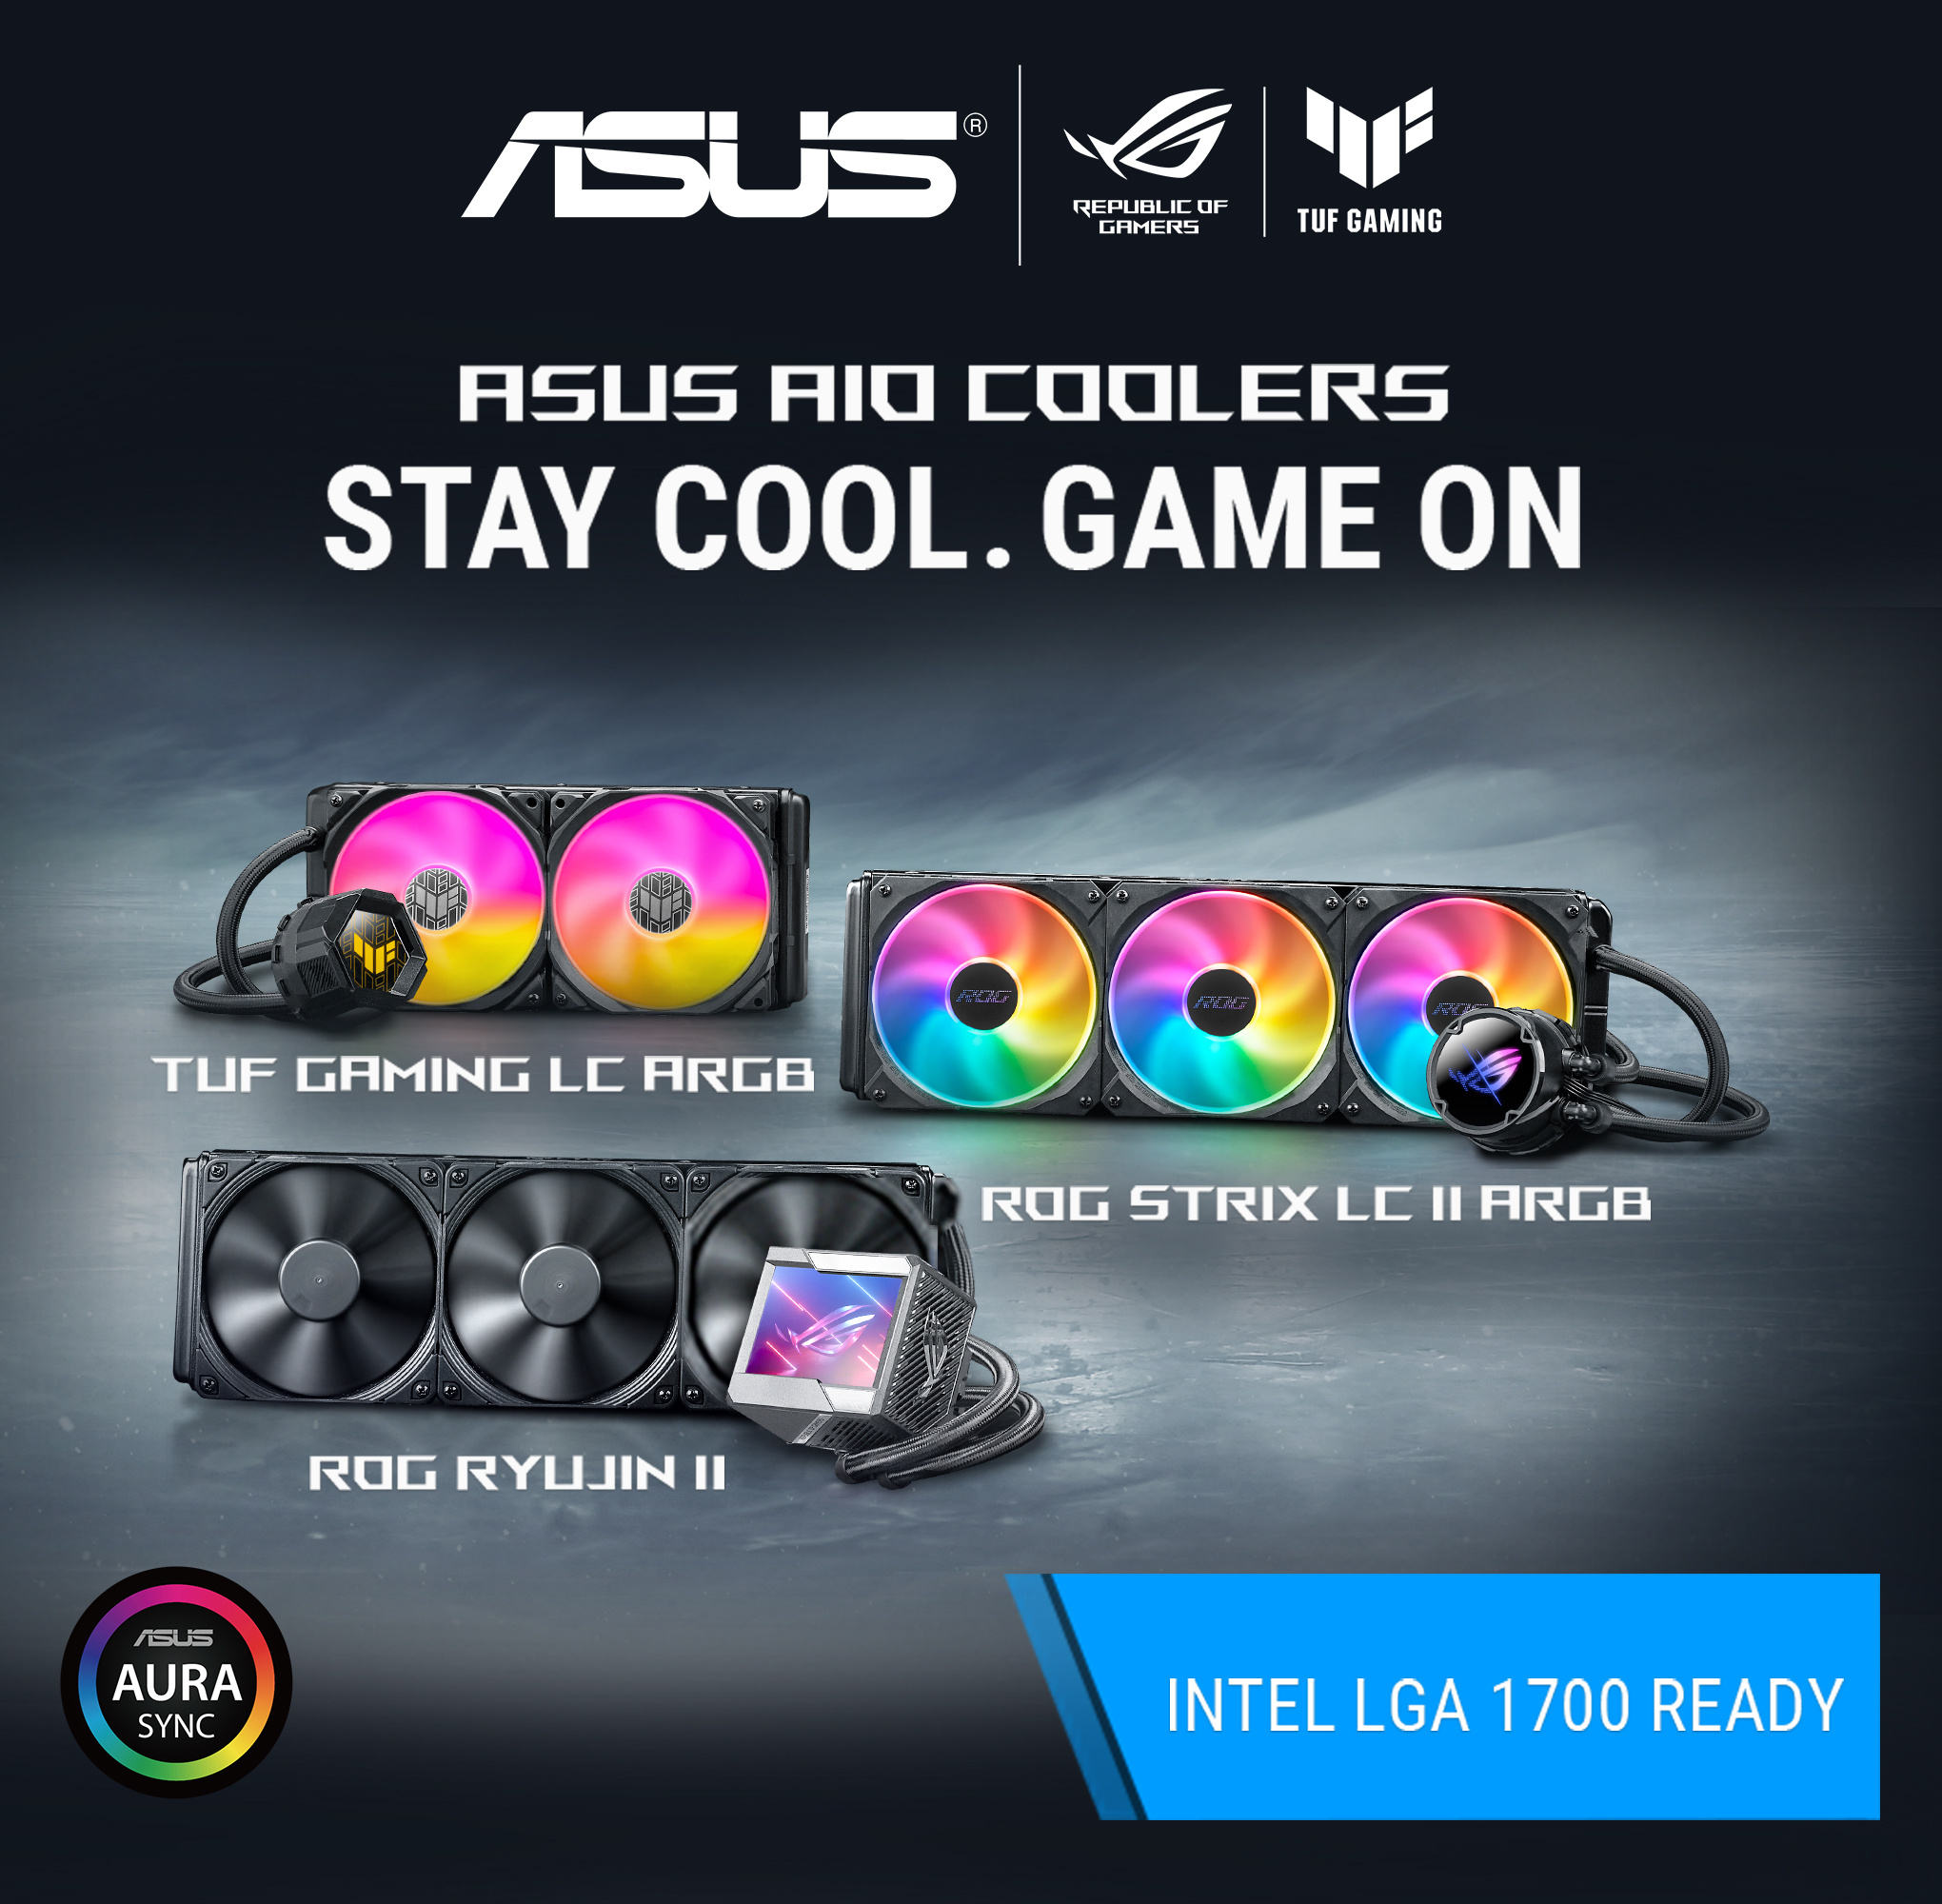 Asus AIO Cooler - Stay Cool and Game On ( Sept 7 - Oct 15, 2022)